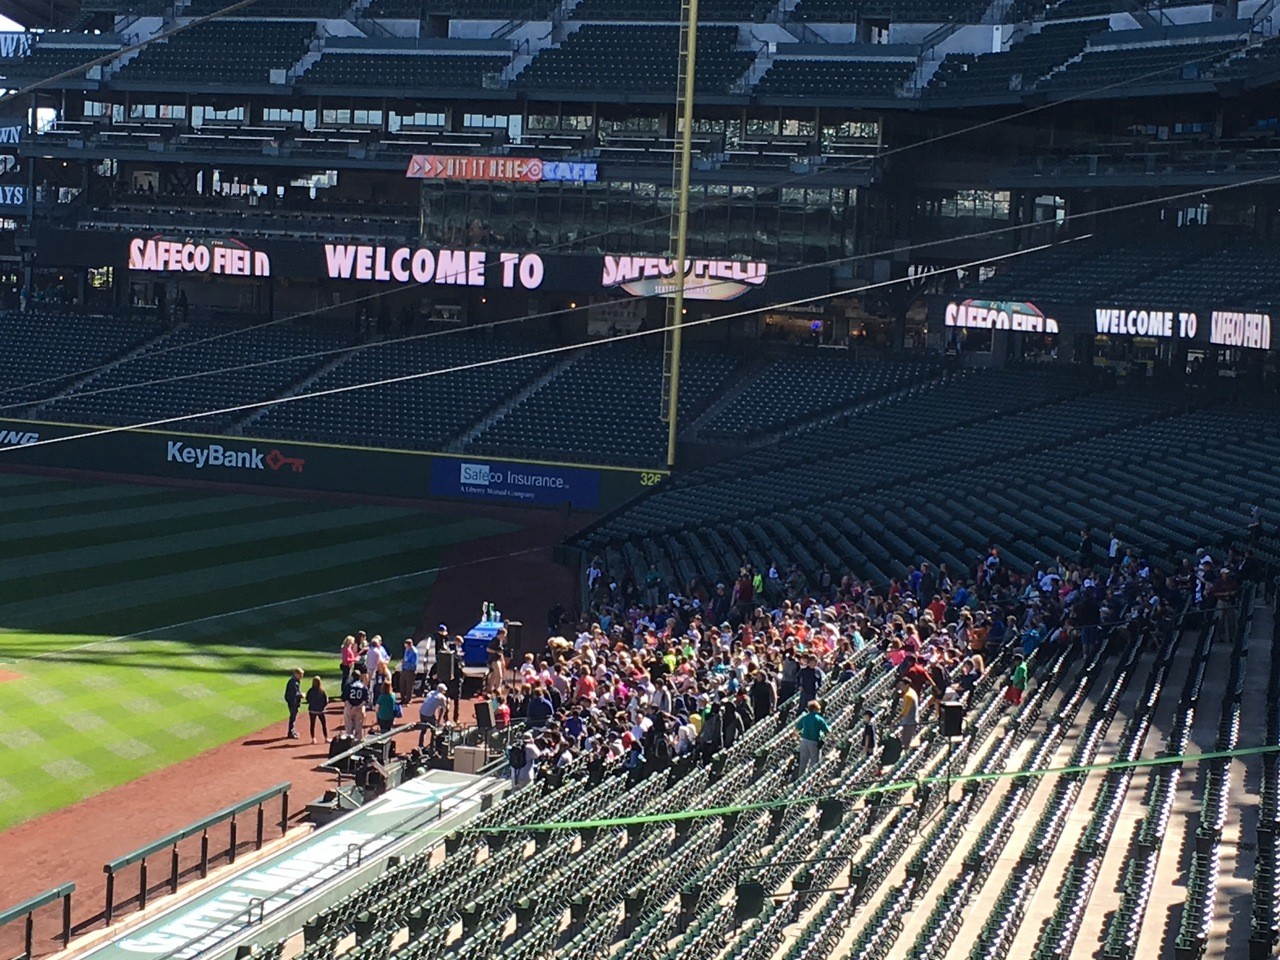 The kids arrived to Safeco Field early for Wednesday’s Seattle Mariners game against the Tampa Bay Rays.